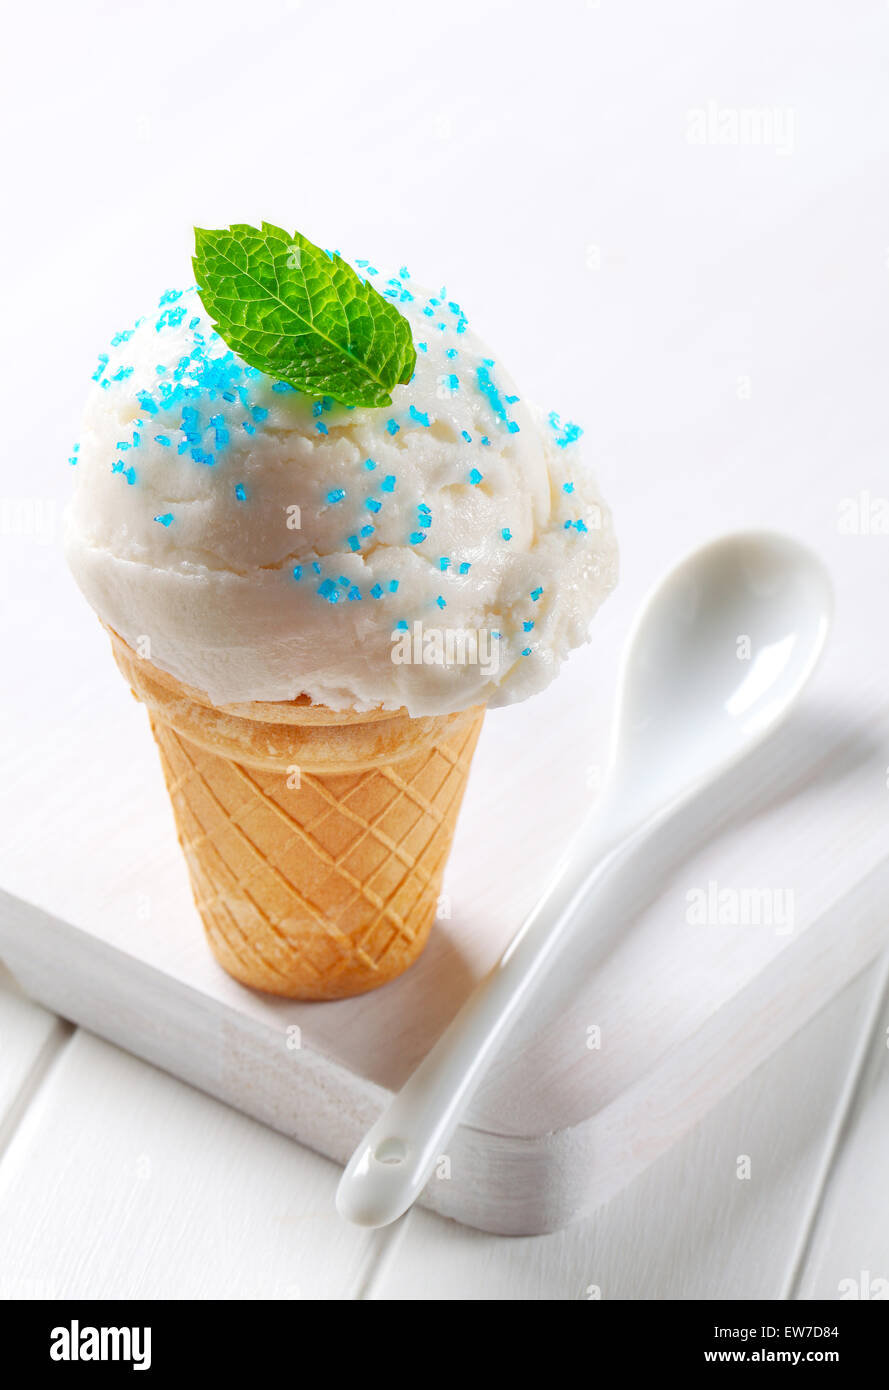 Lemon ice cream cone topped with sprinkles Stock Photo